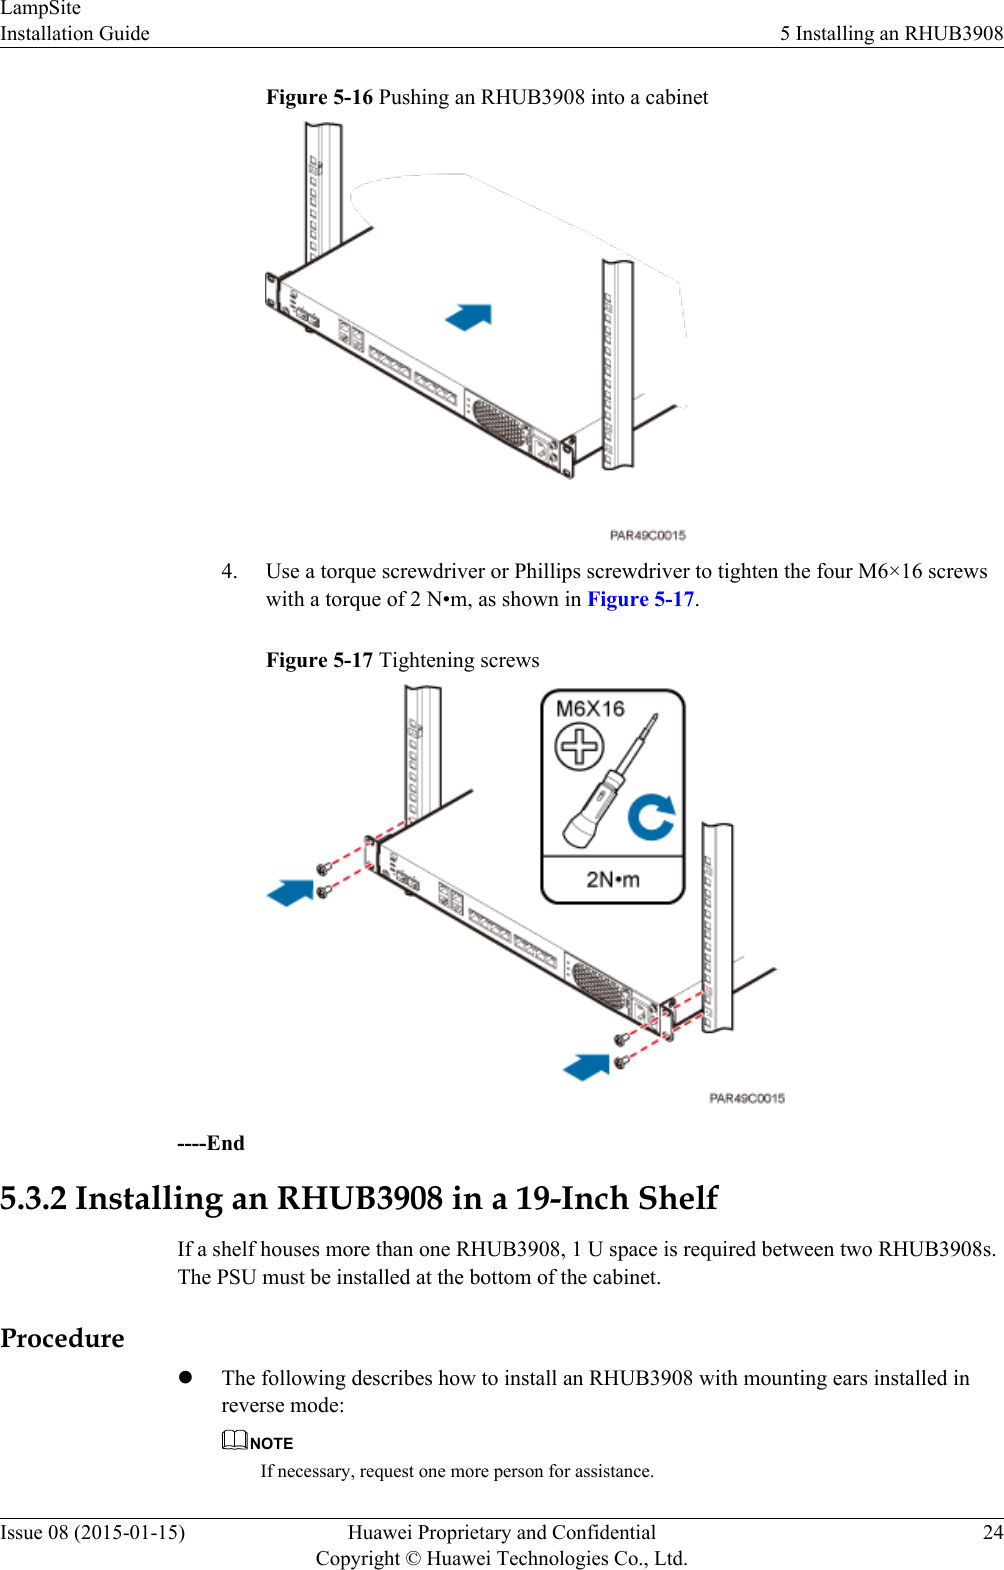 Figure 5-16 Pushing an RHUB3908 into a cabinet4. Use a torque screwdriver or Phillips screwdriver to tighten the four M6×16 screwswith a torque of 2 N•m, as shown in Figure 5-17.Figure 5-17 Tightening screws----End5.3.2 Installing an RHUB3908 in a 19-Inch ShelfIf a shelf houses more than one RHUB3908, 1 U space is required between two RHUB3908s.The PSU must be installed at the bottom of the cabinet.ProcedurelThe following describes how to install an RHUB3908 with mounting ears installed inreverse mode:NOTEIf necessary, request one more person for assistance.LampSiteInstallation Guide 5 Installing an RHUB3908Issue 08 (2015-01-15) Huawei Proprietary and ConfidentialCopyright © Huawei Technologies Co., Ltd.24